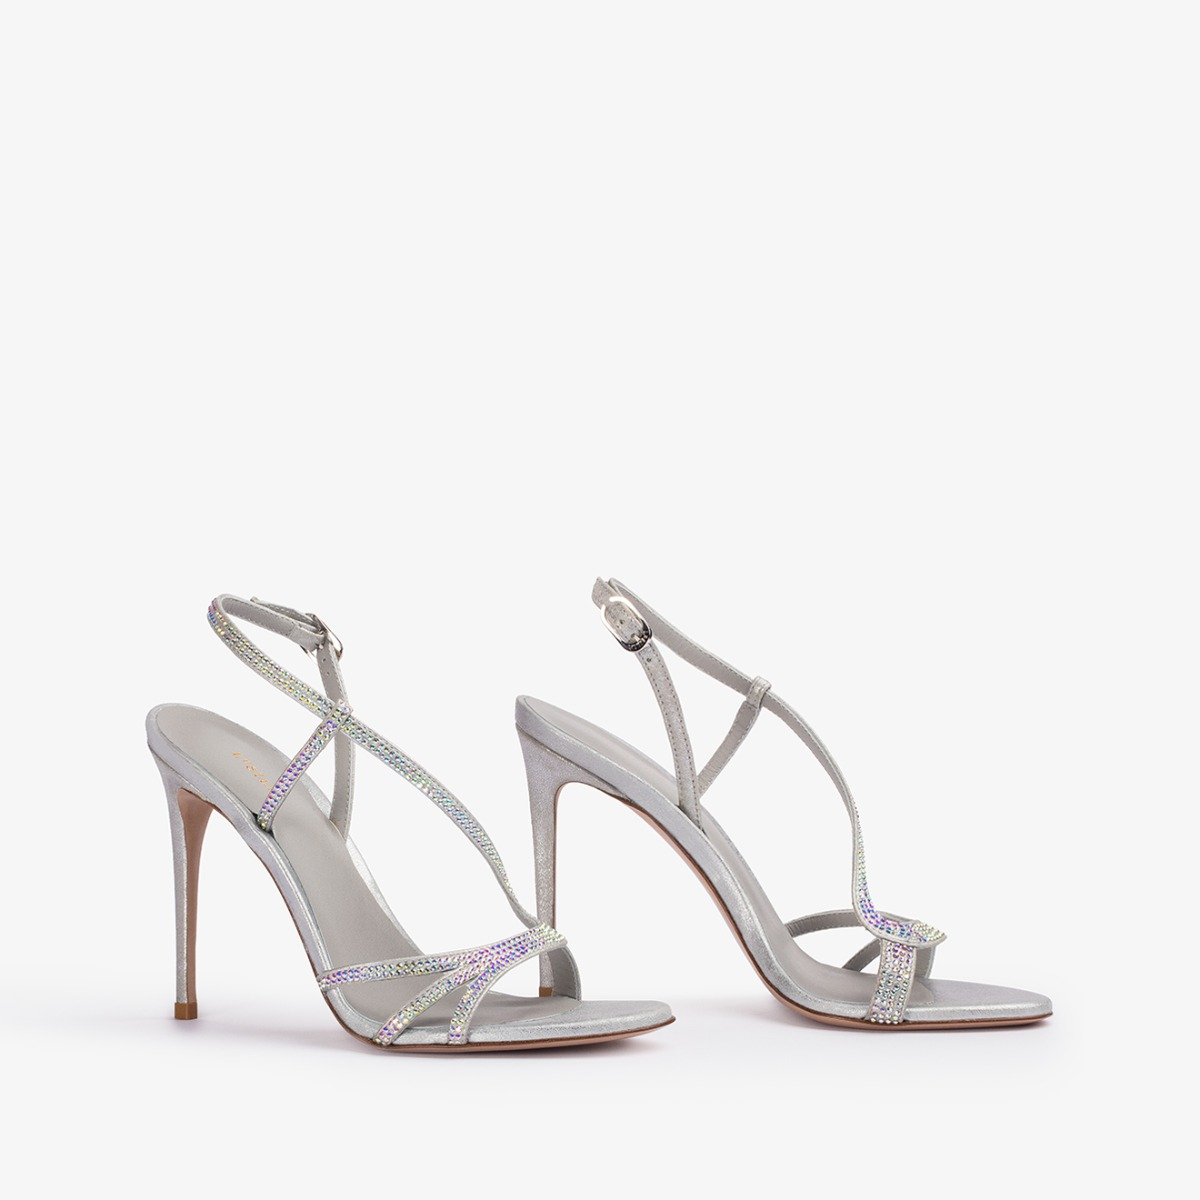 SIRI SANDAL 100 mm - Le Silla official outlet